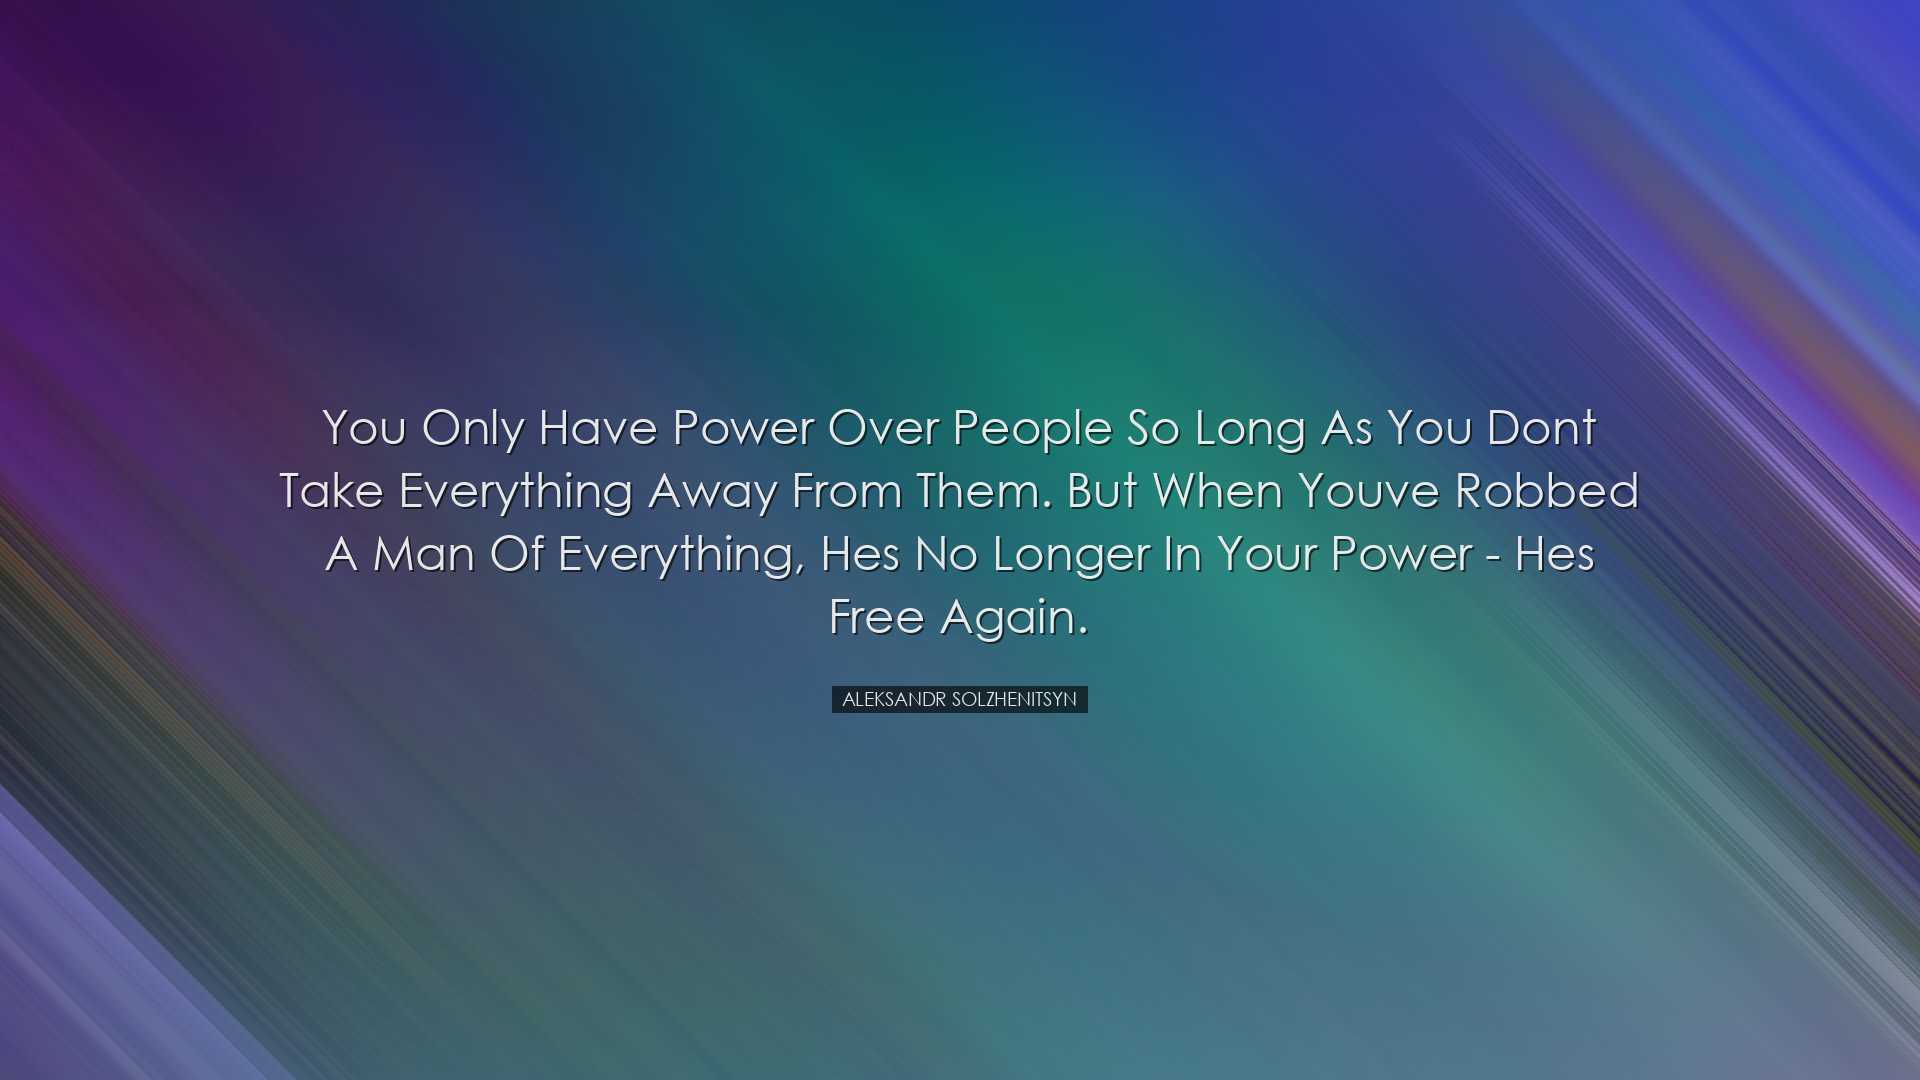 You only have power over people so long as you dont take everythin